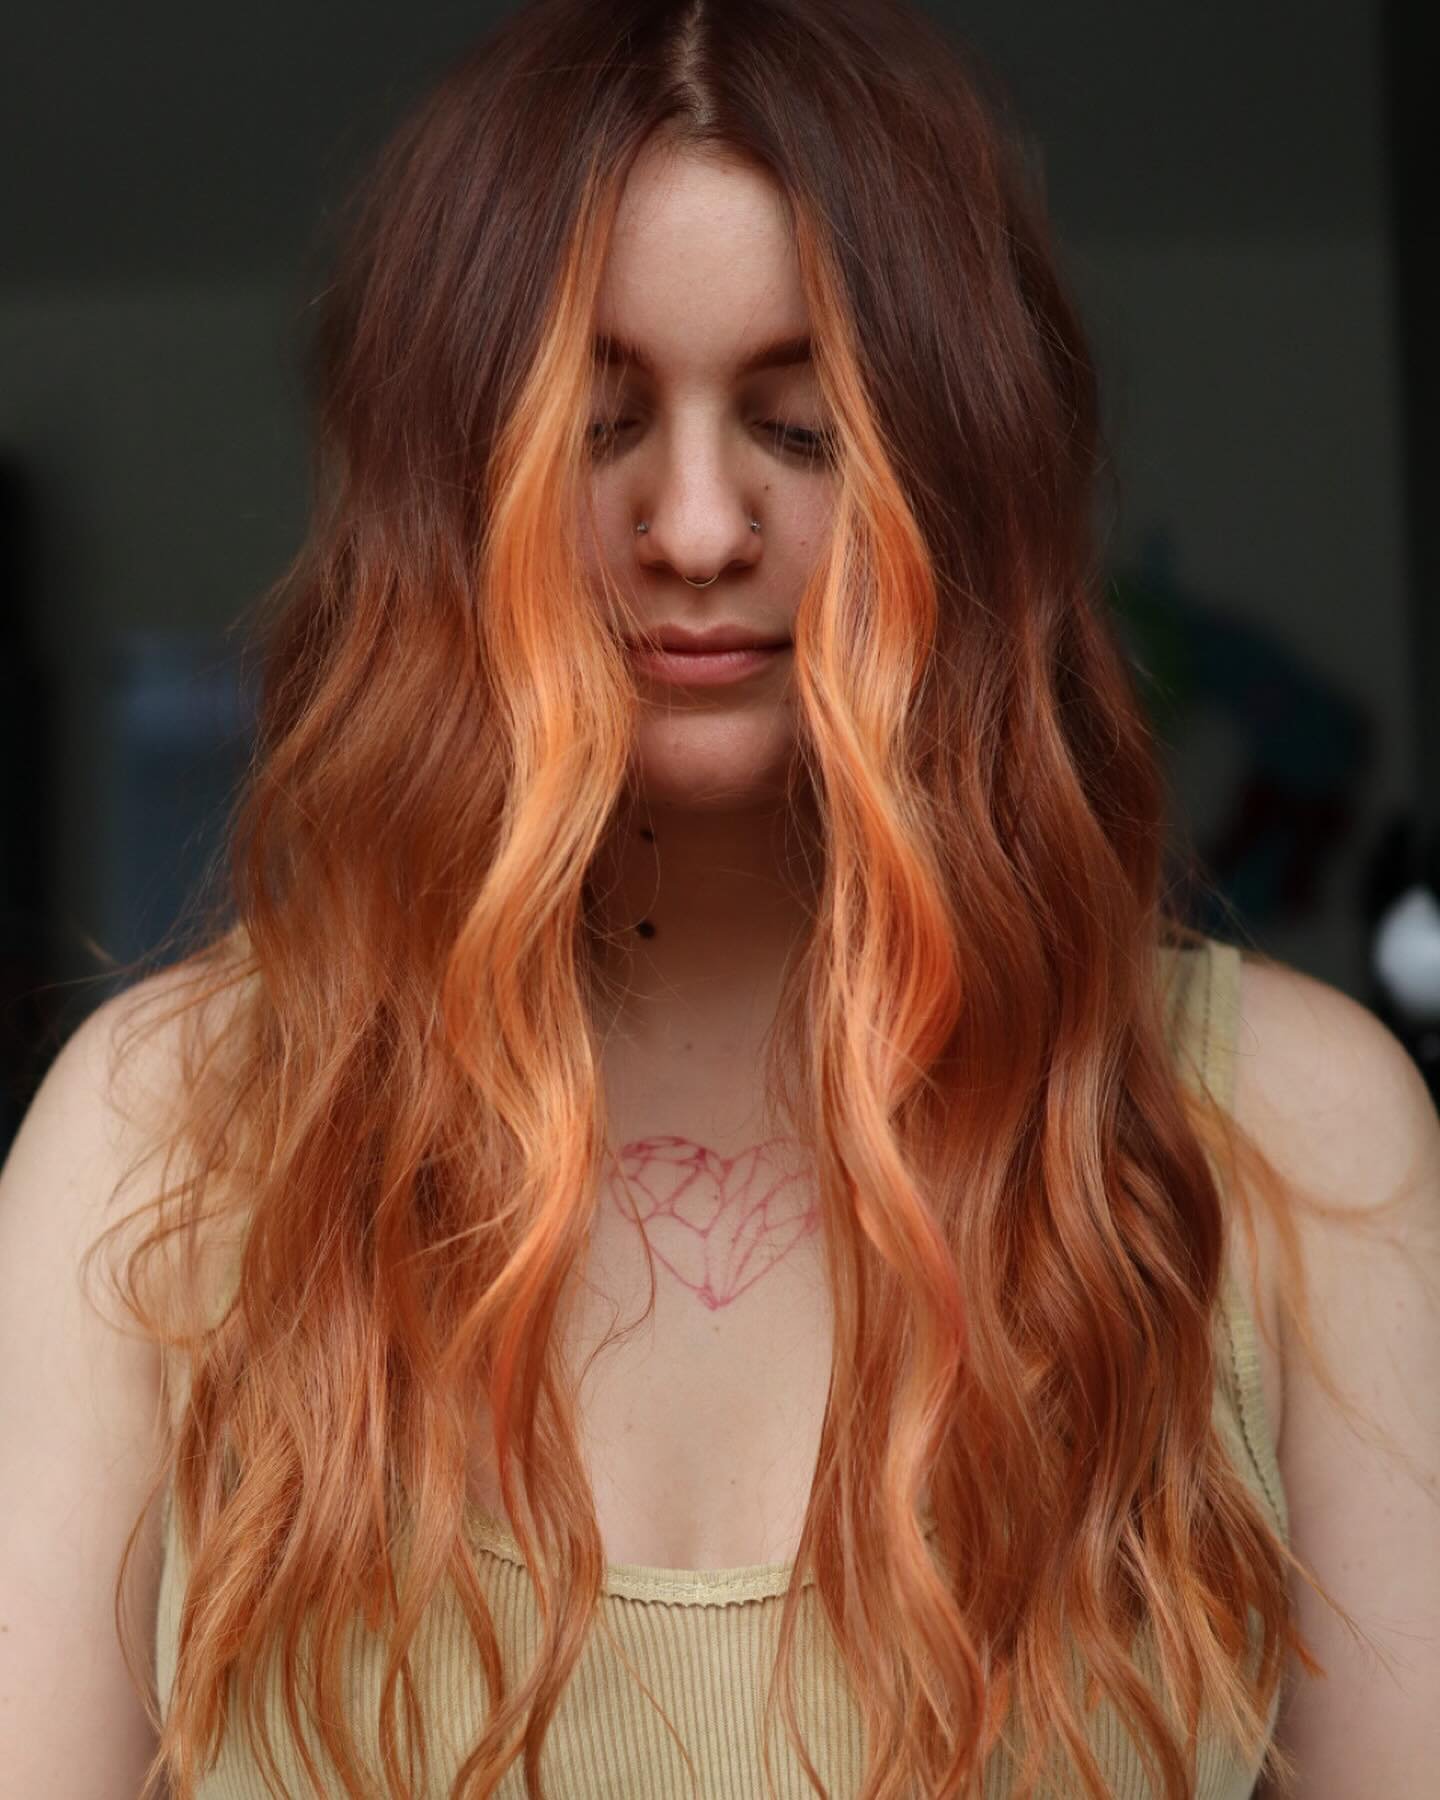 Haily&rsquo;s new copper has a hidden talent. Swipe through to find out what it is. 💕🧡

@olaplex @malibucpro @framar @bioionic @o2professional  @sharkfinshears  @crickettools @trionicshaircare @dangerjonescreative @redken @leafandflowerhair @gmreve